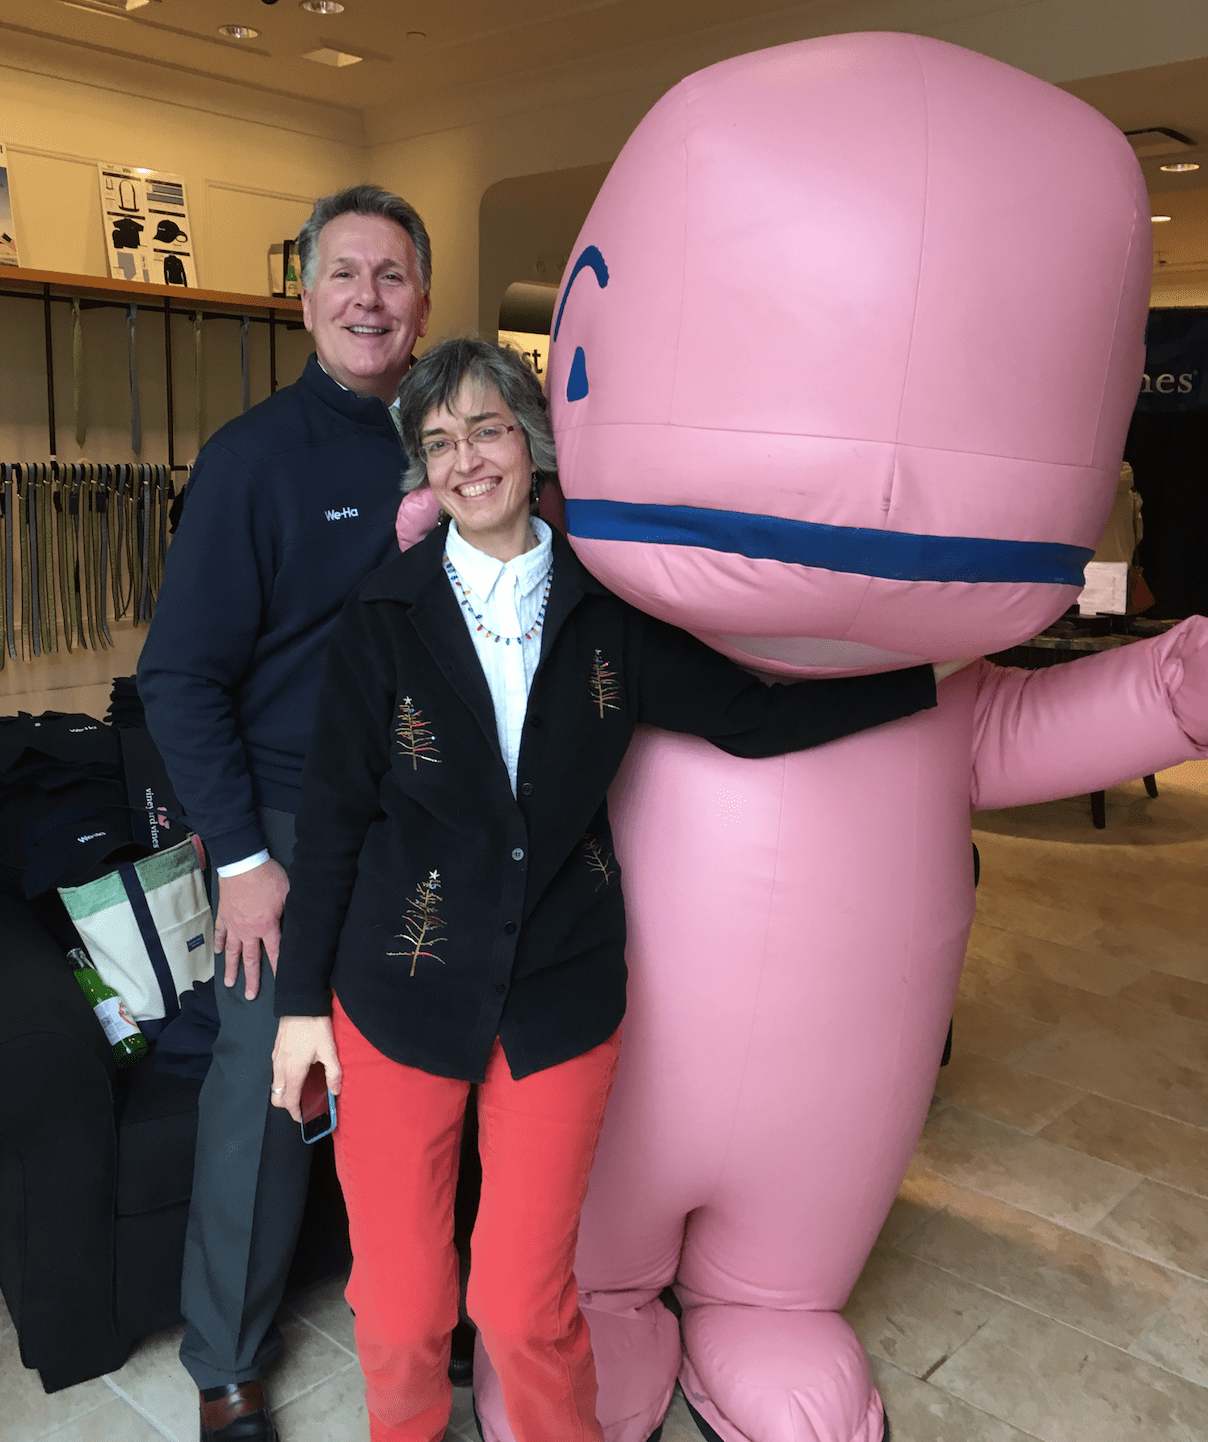 Tom Hickey and Joy Taylor of West Hartford Magazine with the Vineyard Vines Whale Mascot at the We-Ha Pop-Up Store in Blue Back Square. Photo credit: Joy Taylor